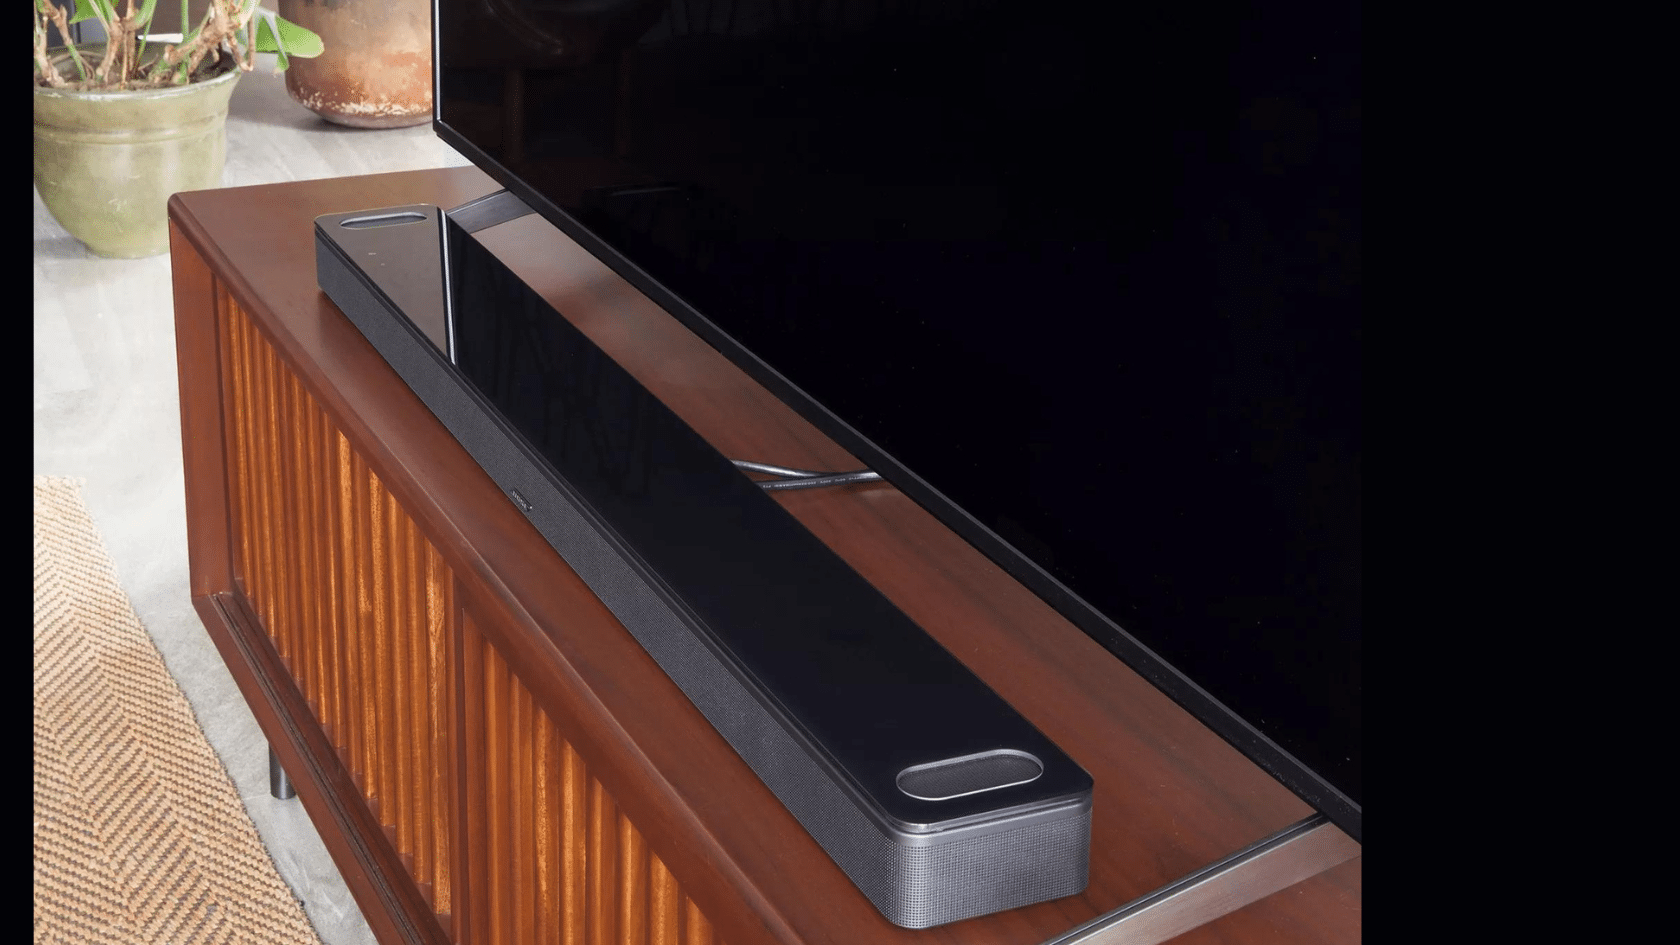 The new Bose Smart Ultra Soundbar combines Dolby Atmos and AI